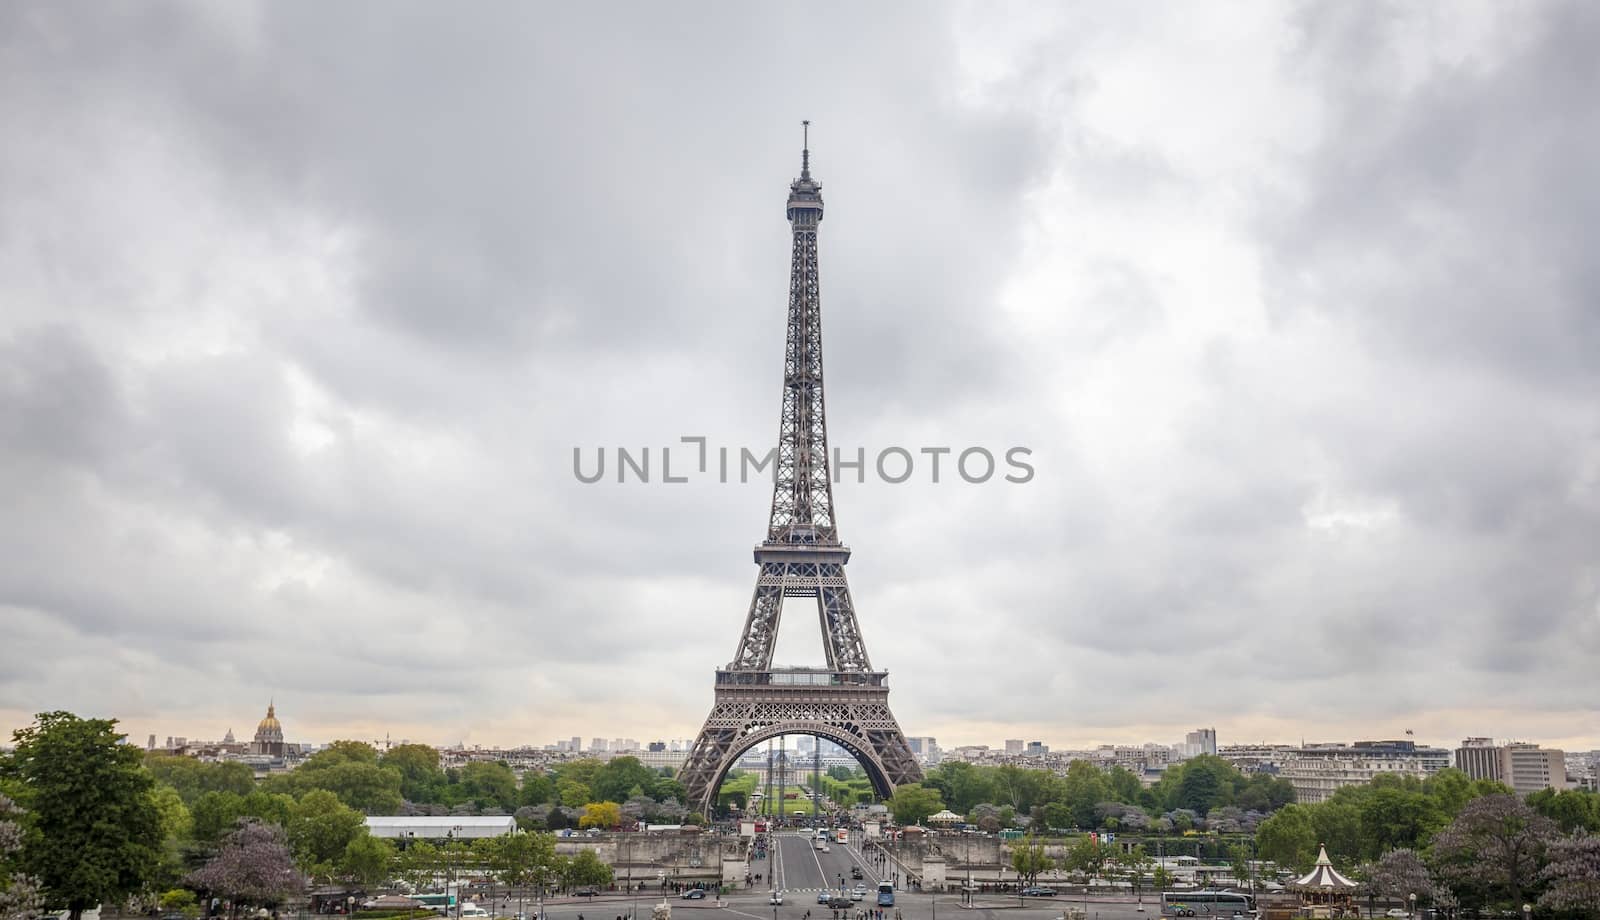 View of the famous Eiffel Tower in Paris, France. Vivid colors in cloudy day